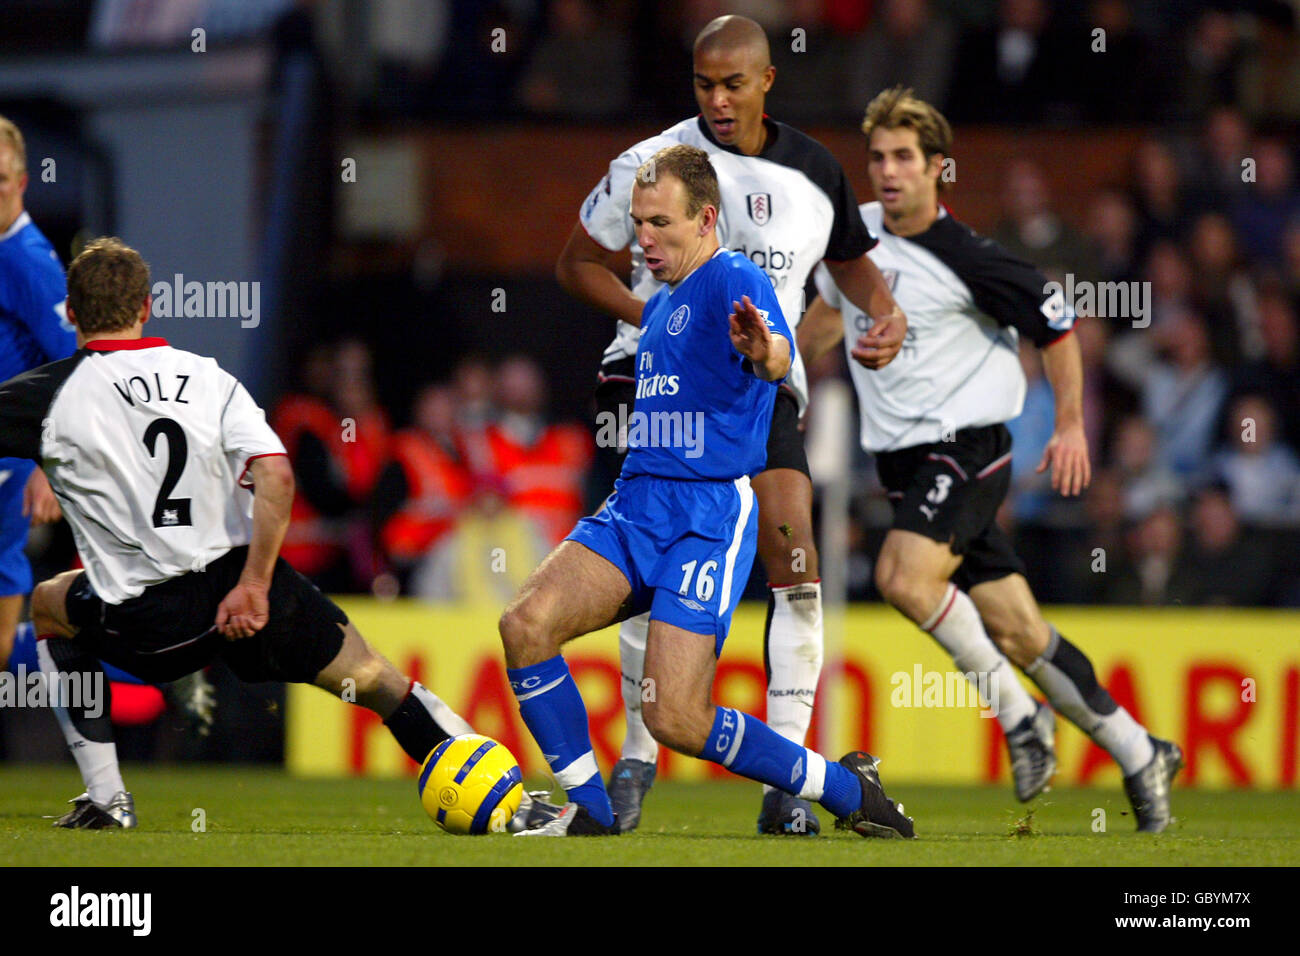 Soccer - FA Barclays Premiership - Fulham v Chelsea. Chelsea's Arjen Robben takes on Fulham's Moritz Volz on his way to scoring his goal Stock Photo